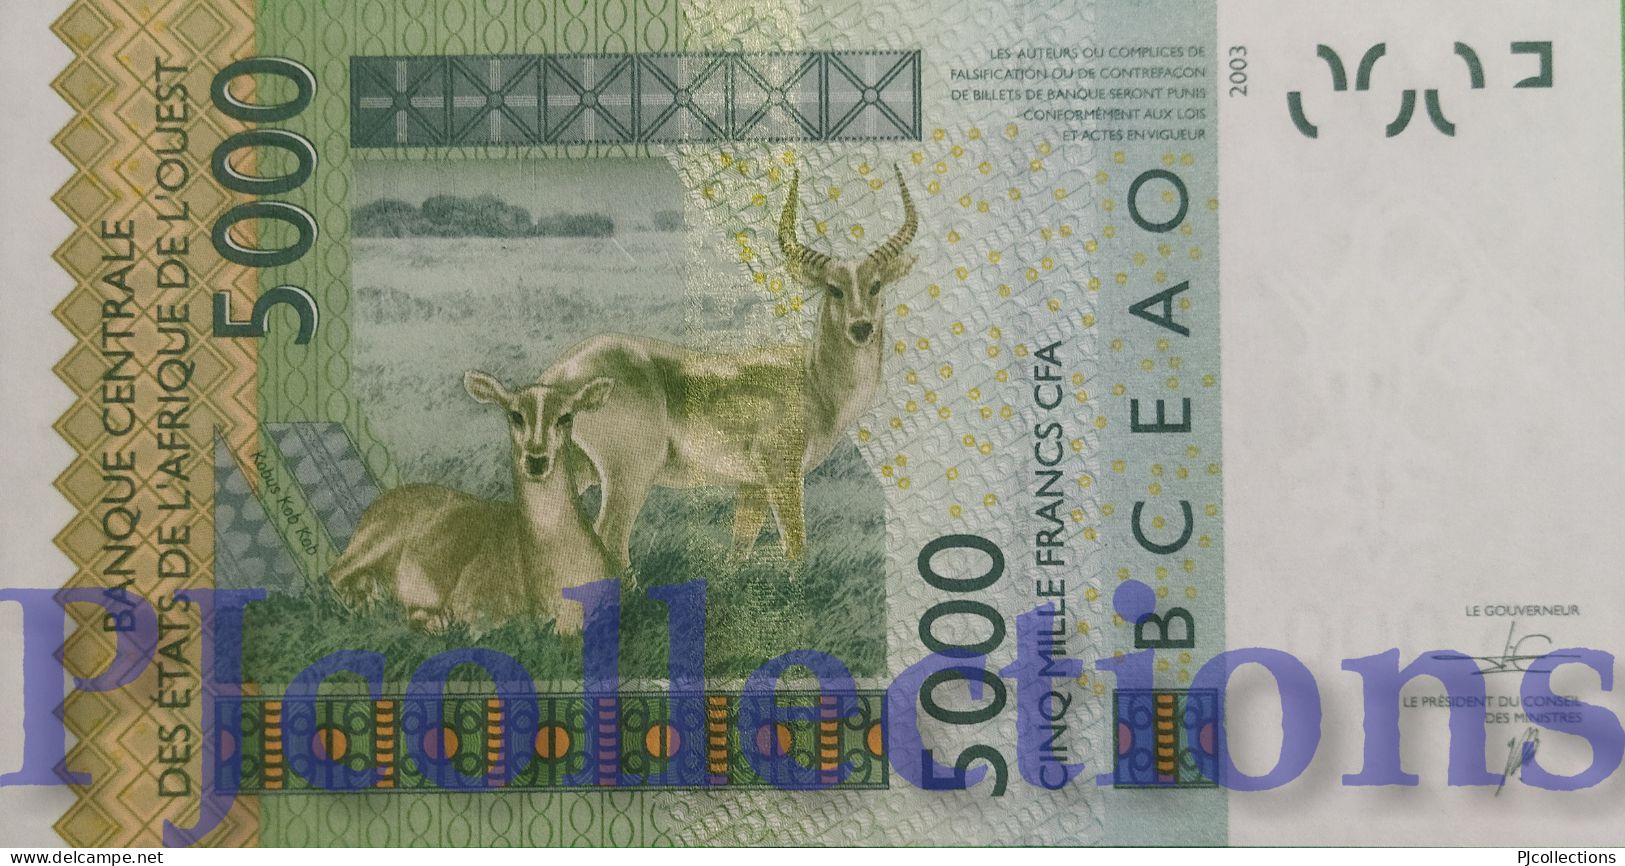 WEST AFRICAN STATES 5000 FRANCS 2016 PICK 717Kp UNC - West-Afrikaanse Staten